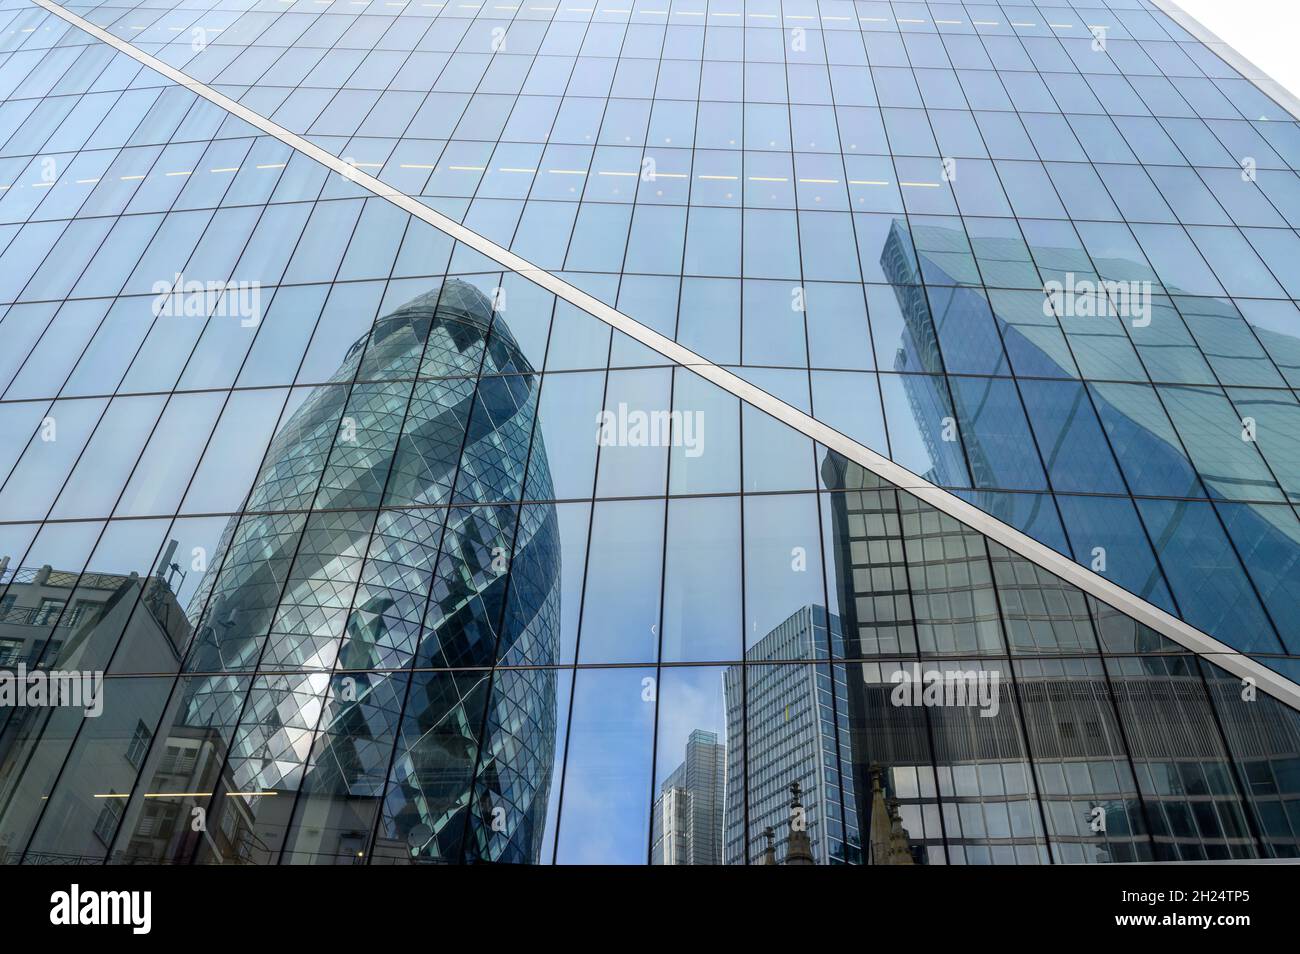 The Gherkin and The Cheesegrater buildings reflected in the glass facade of The Scalpel building in City of London, England. Stock Photo